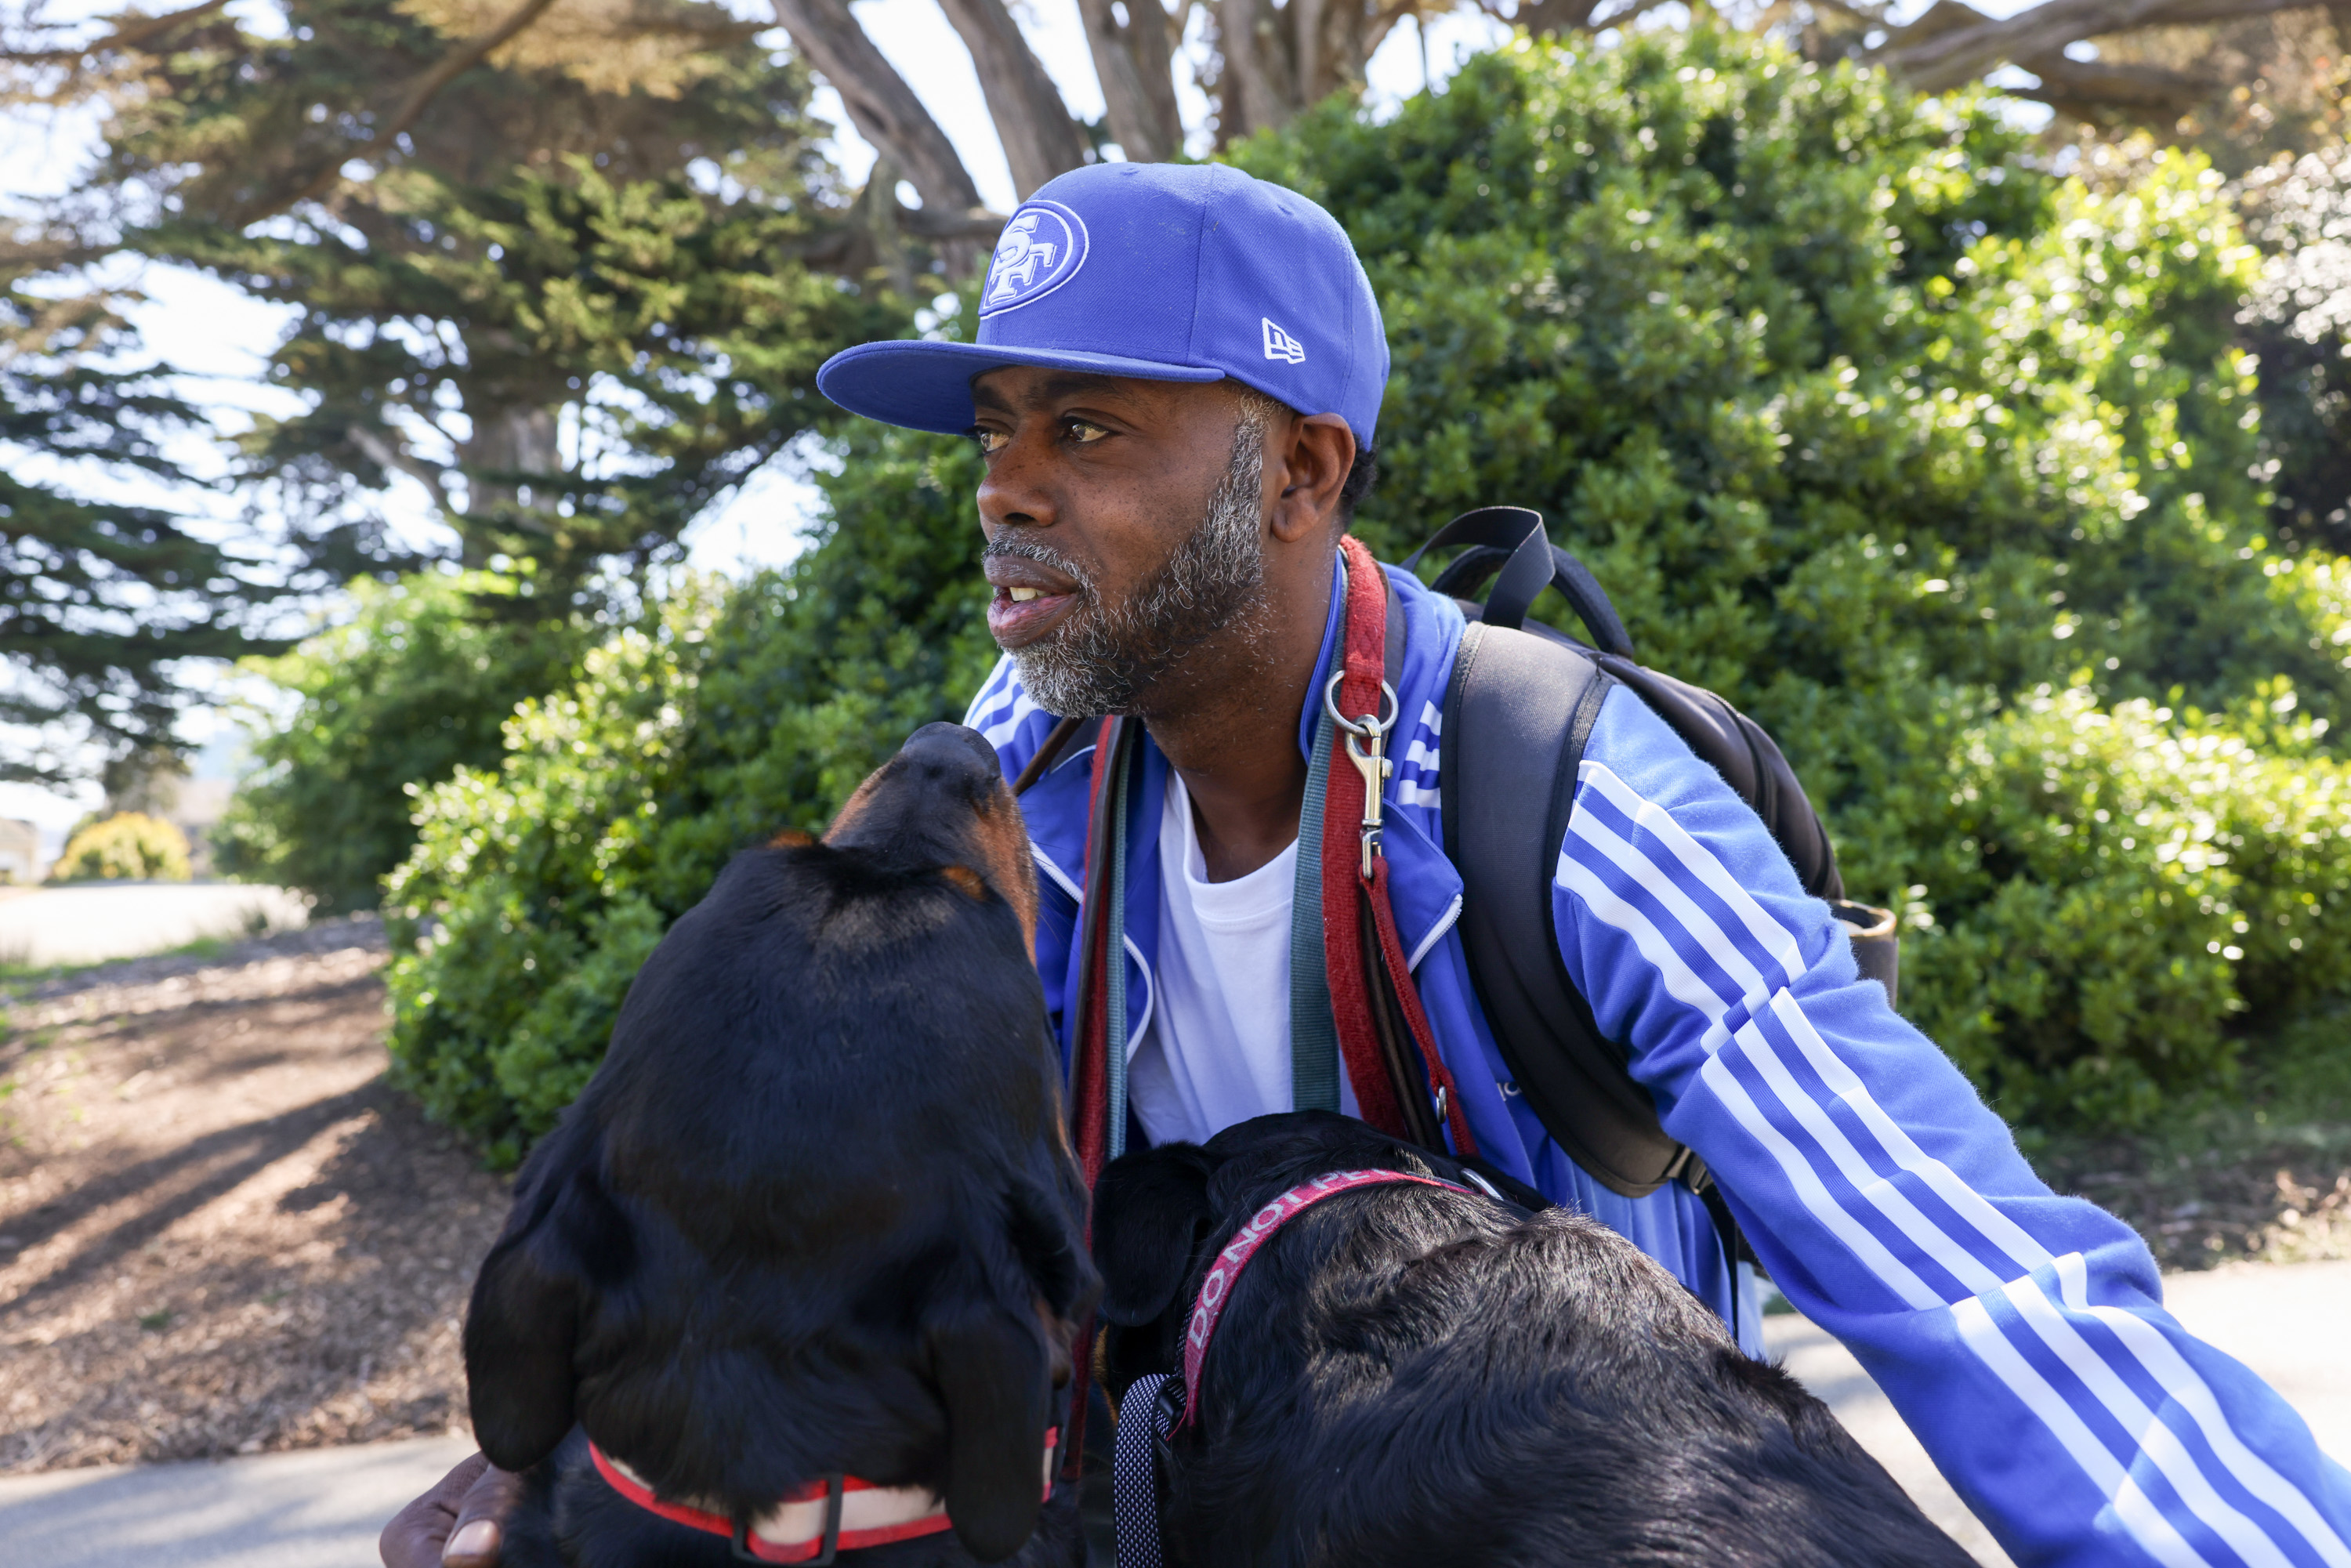 A man in a blue cap and jacket walks with two dogs in a sunny, tree-lined path.